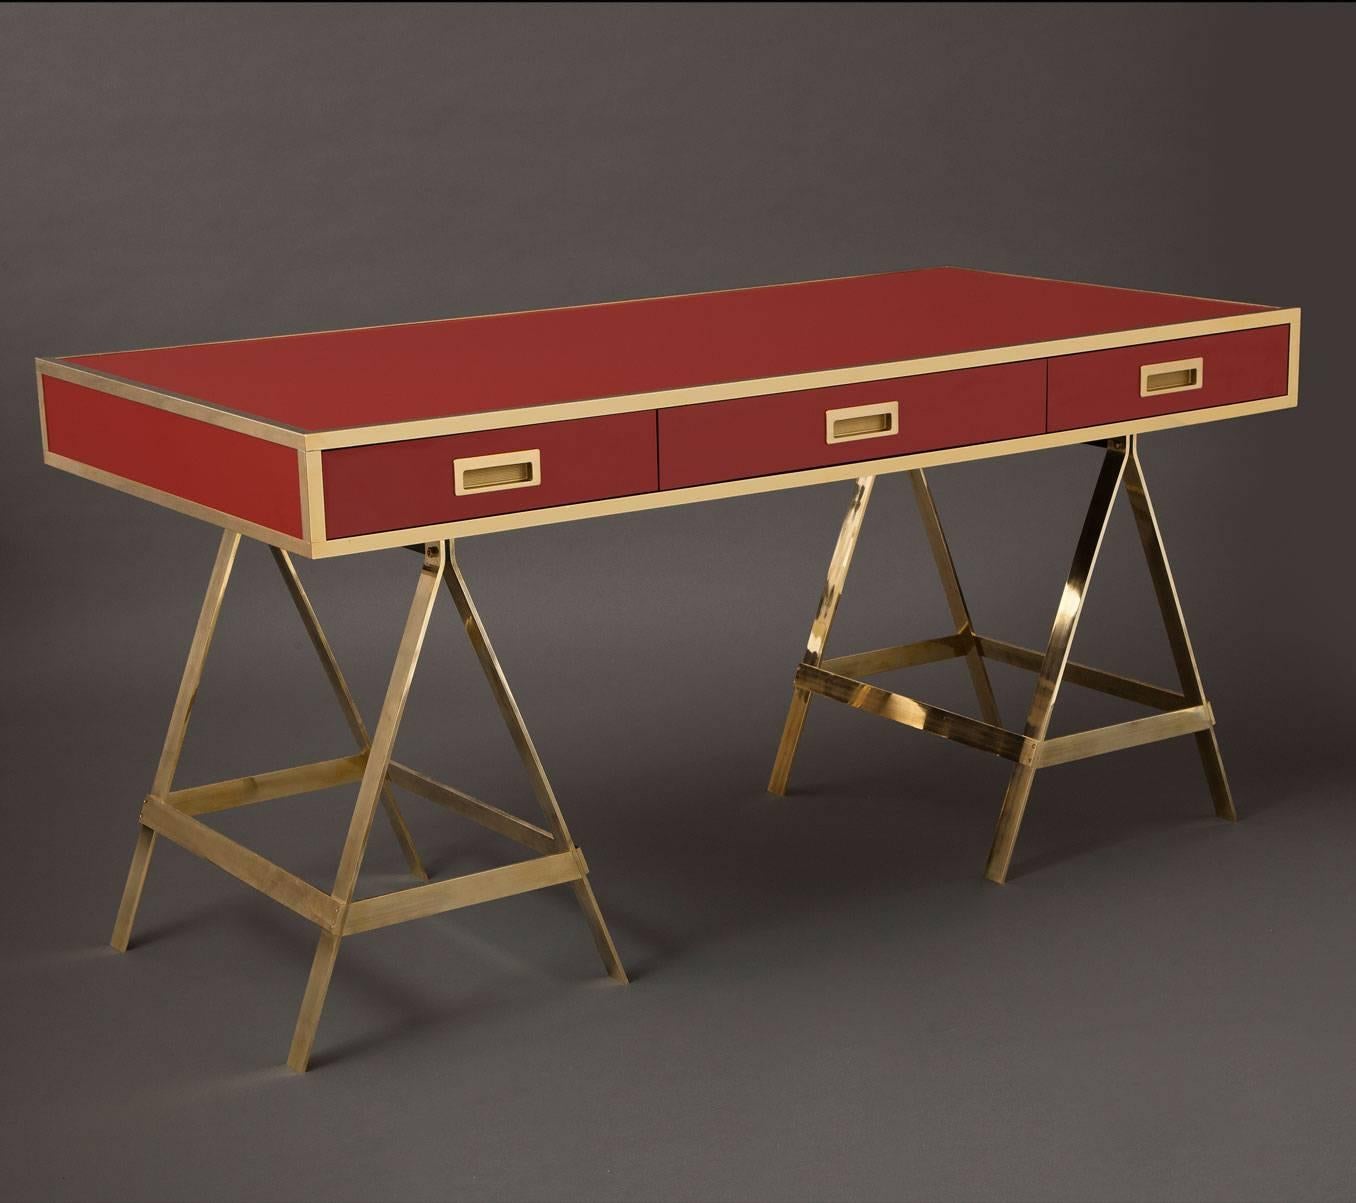 The Albrizzi Desk
Trestle desk in matte laminate with three dovetailed drawers and inset pulls. Unlacquered brass trim and saw horse legs that will patina over time. 
Laminate available in a full spectrum of colors.
Made expressly for Liz O'Brien